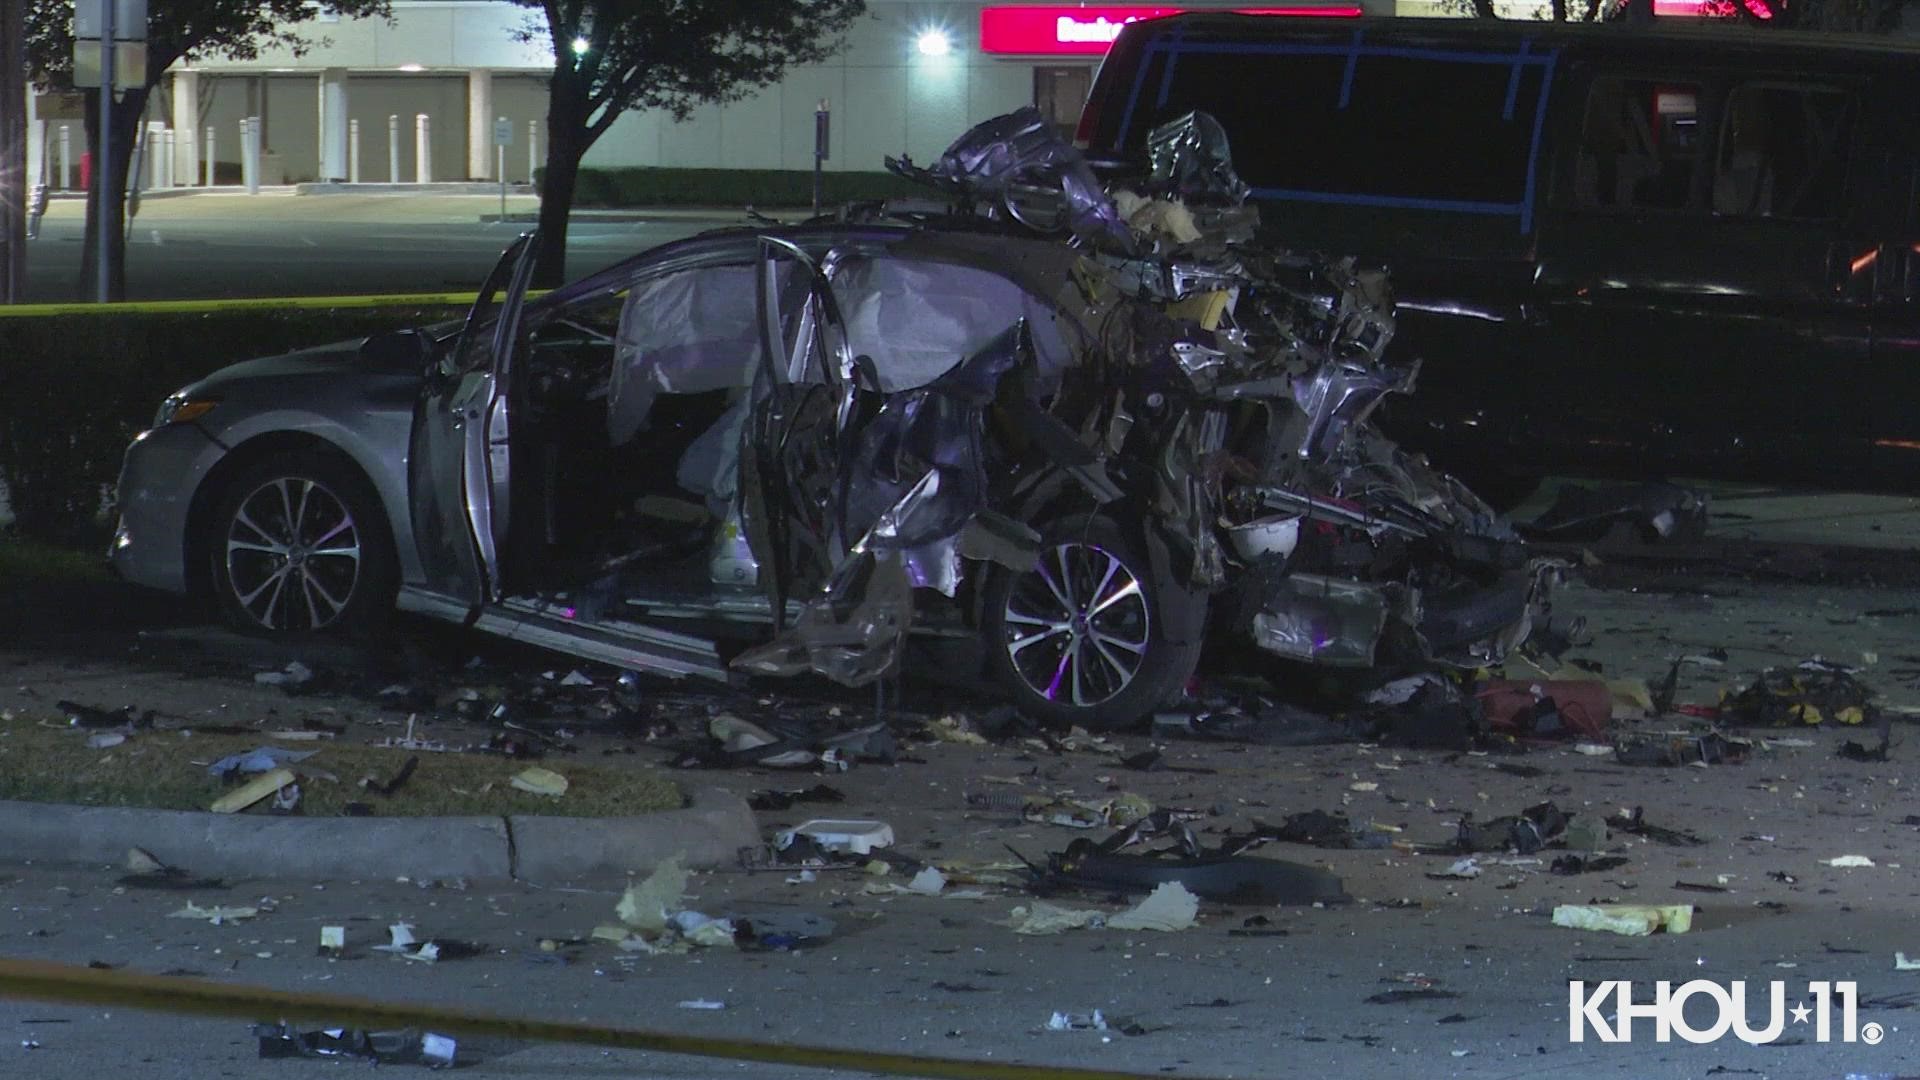 The explosion happened Friday night in a Sonic Drive-In parking lot in northwest Houston.